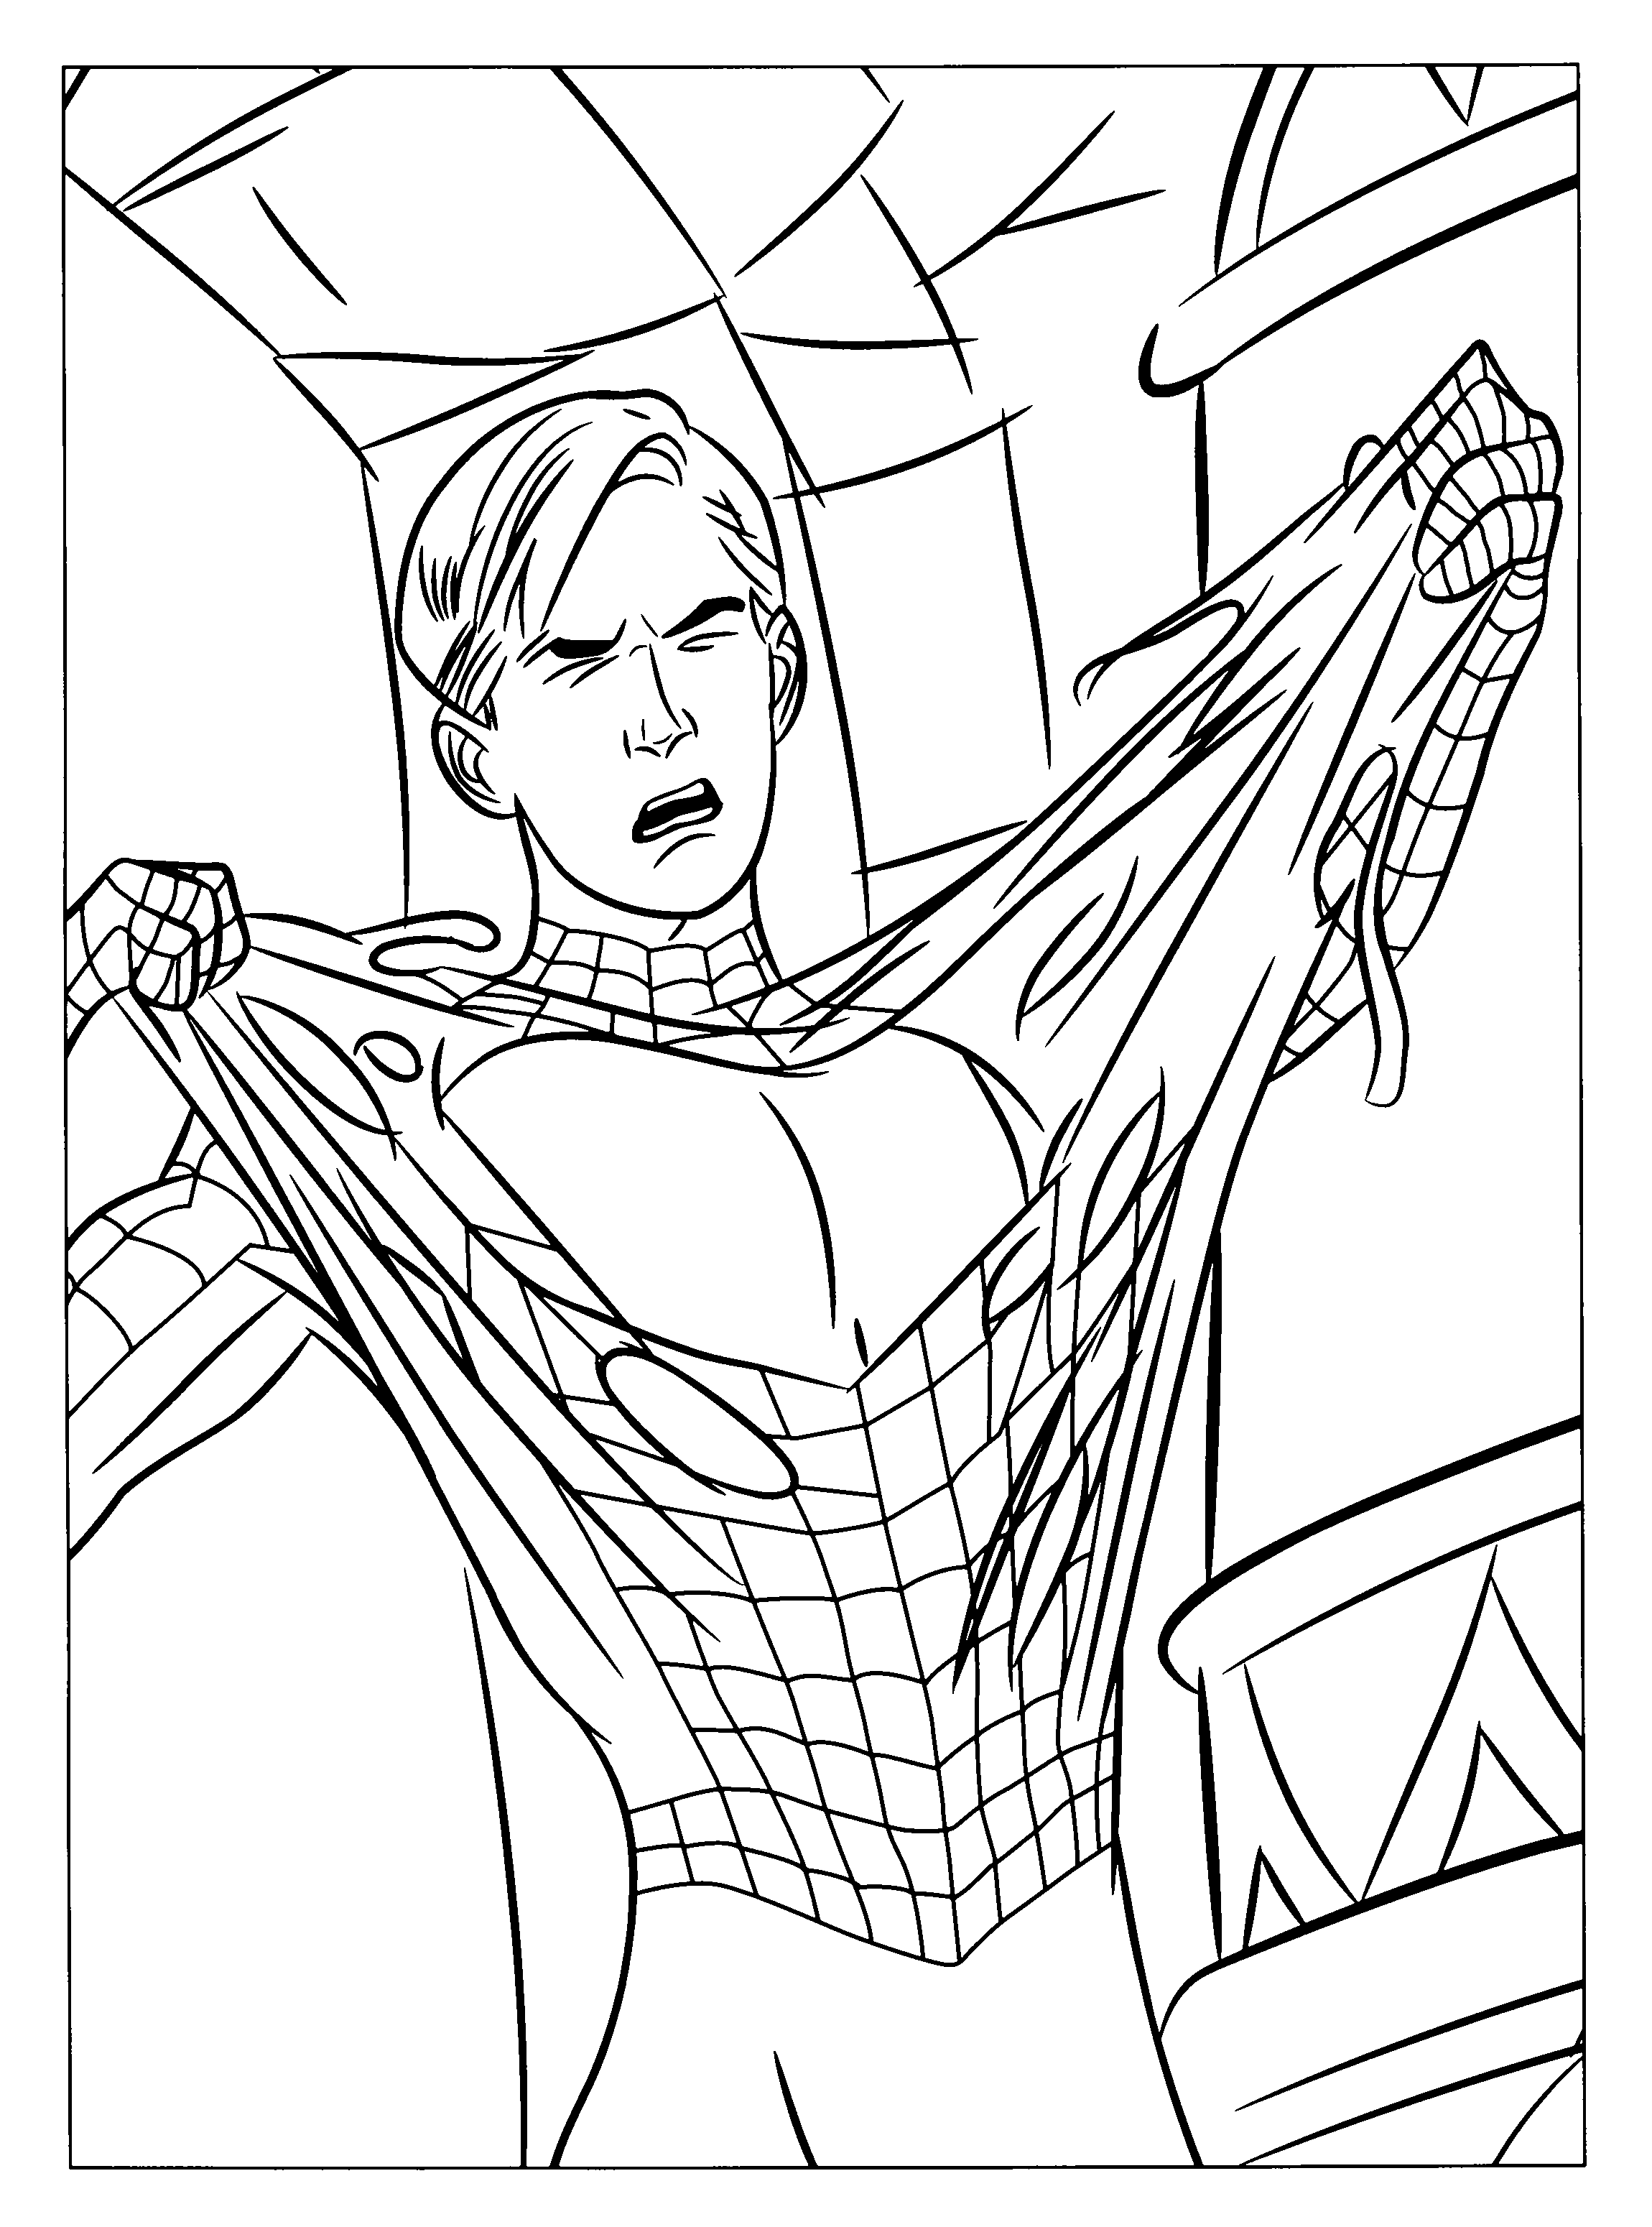 Spiderman Coloring pages | Kids coloring pages | Free coloring ...